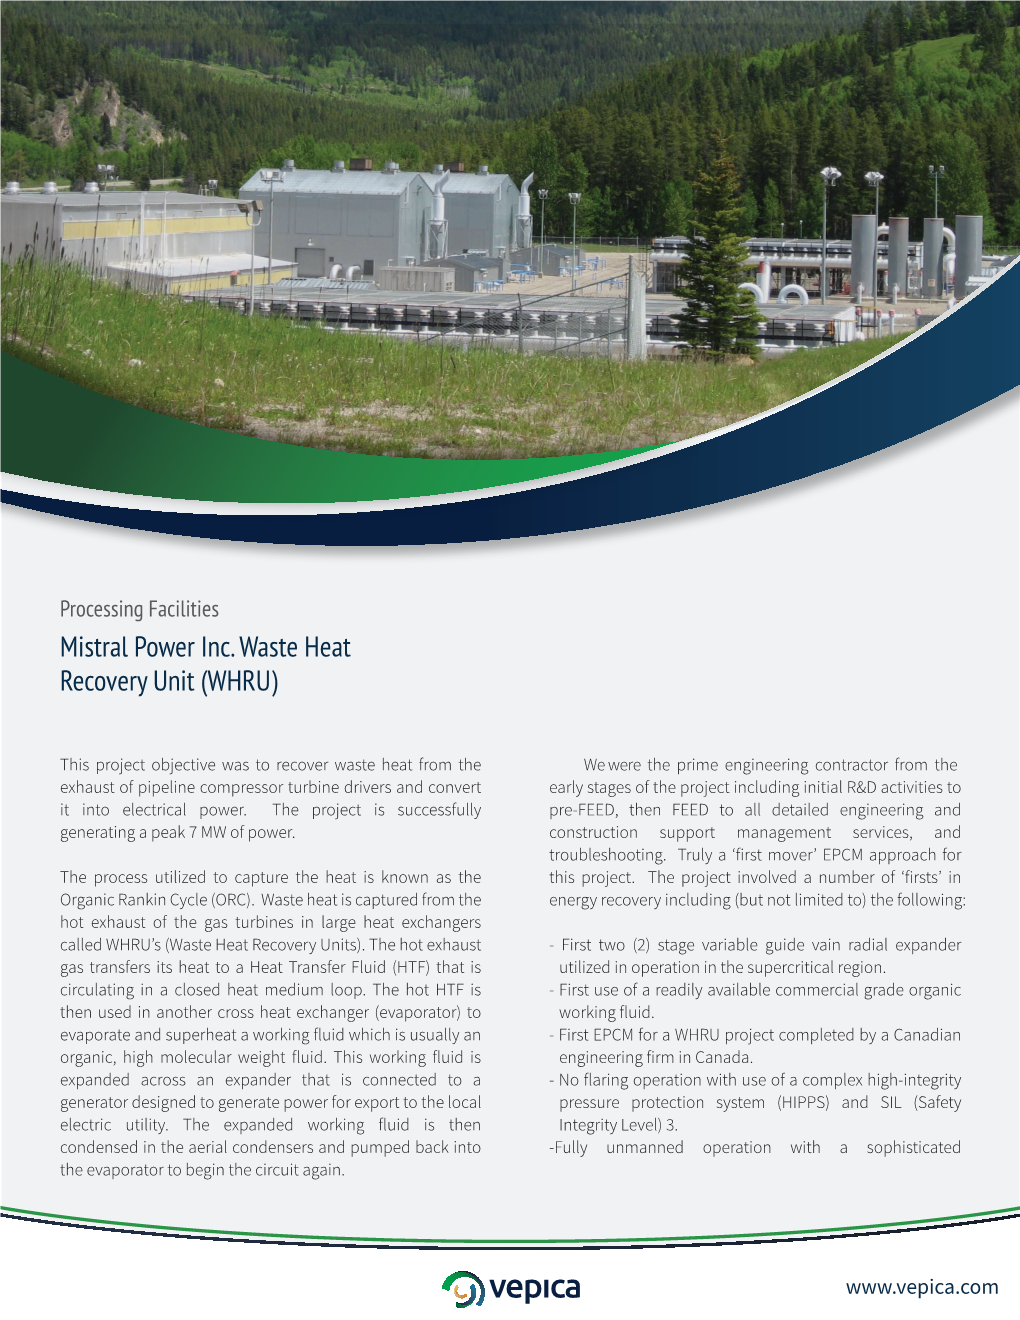 Mistral Power Inc. Waste Heat Recovery Unit (WHRU)